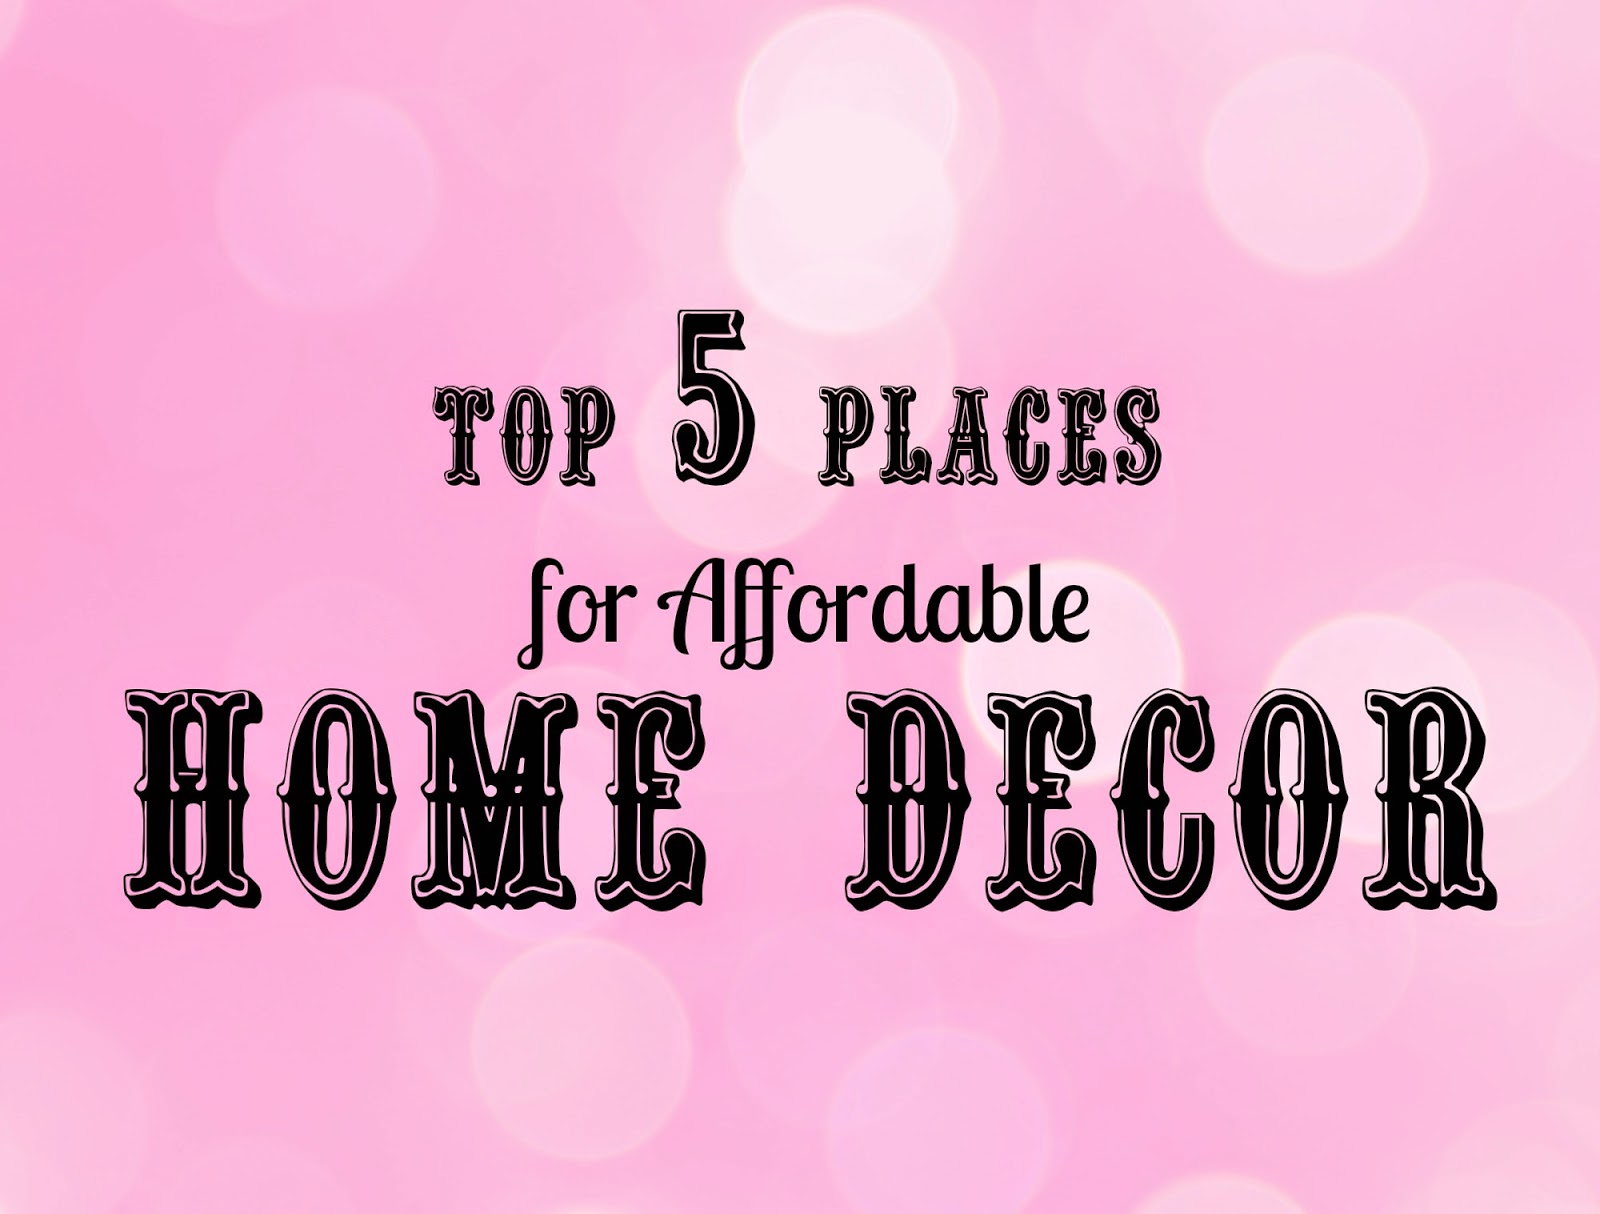 Top 5 Places for Affordable Home Decor - Our Fabulous Life in the Suburbs